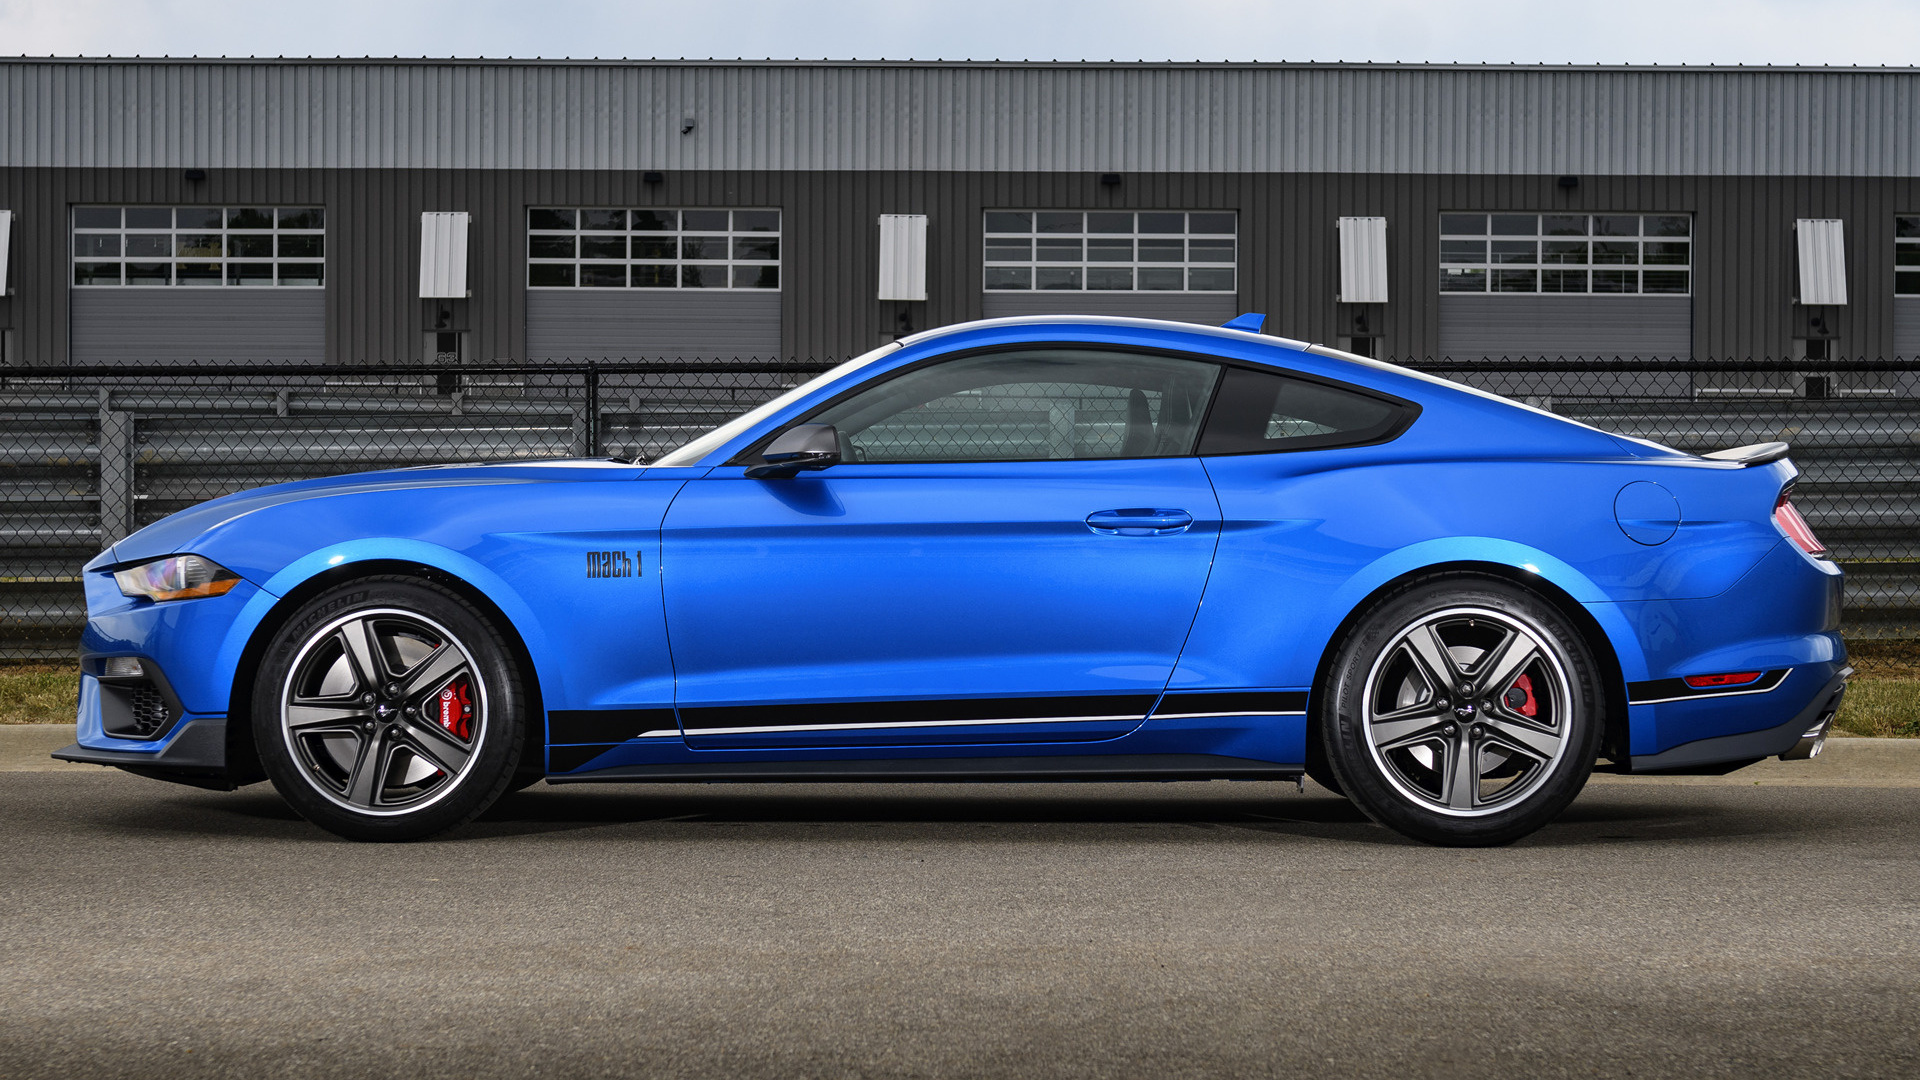 2021 Ford Mustang Mach 1 - Wallpapers and HD Images | Car Pixel